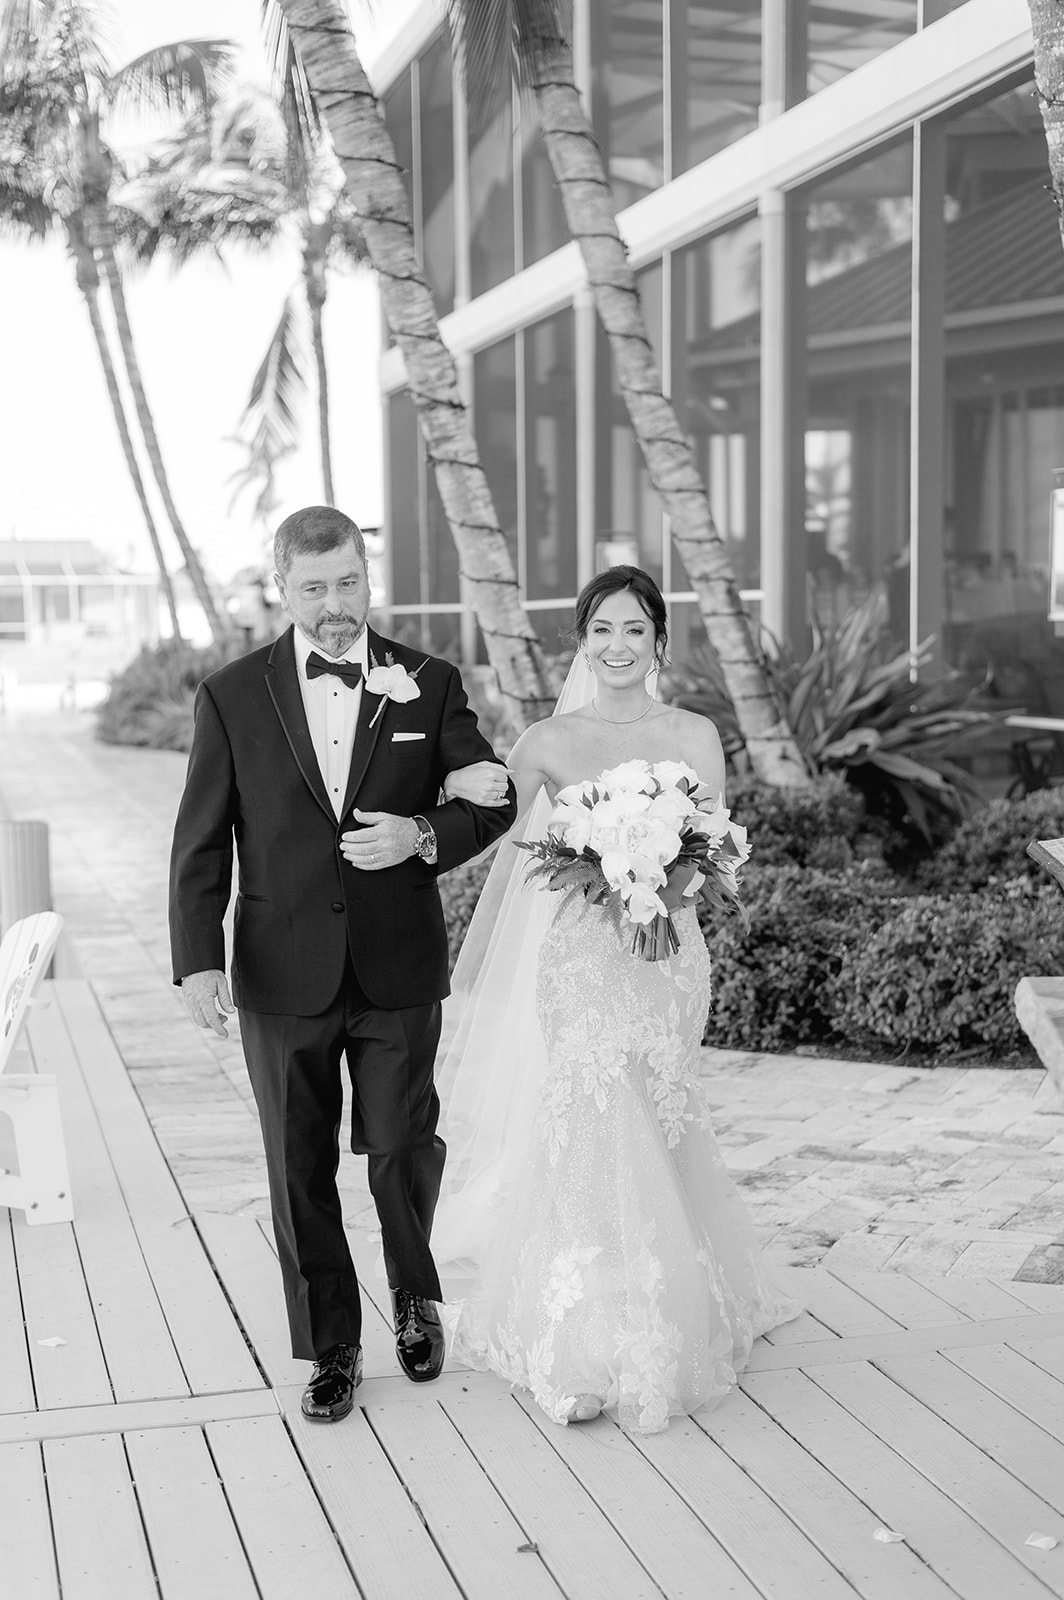 Unique and Creative Marco Island Wedding Photography - A Personalized Touch
